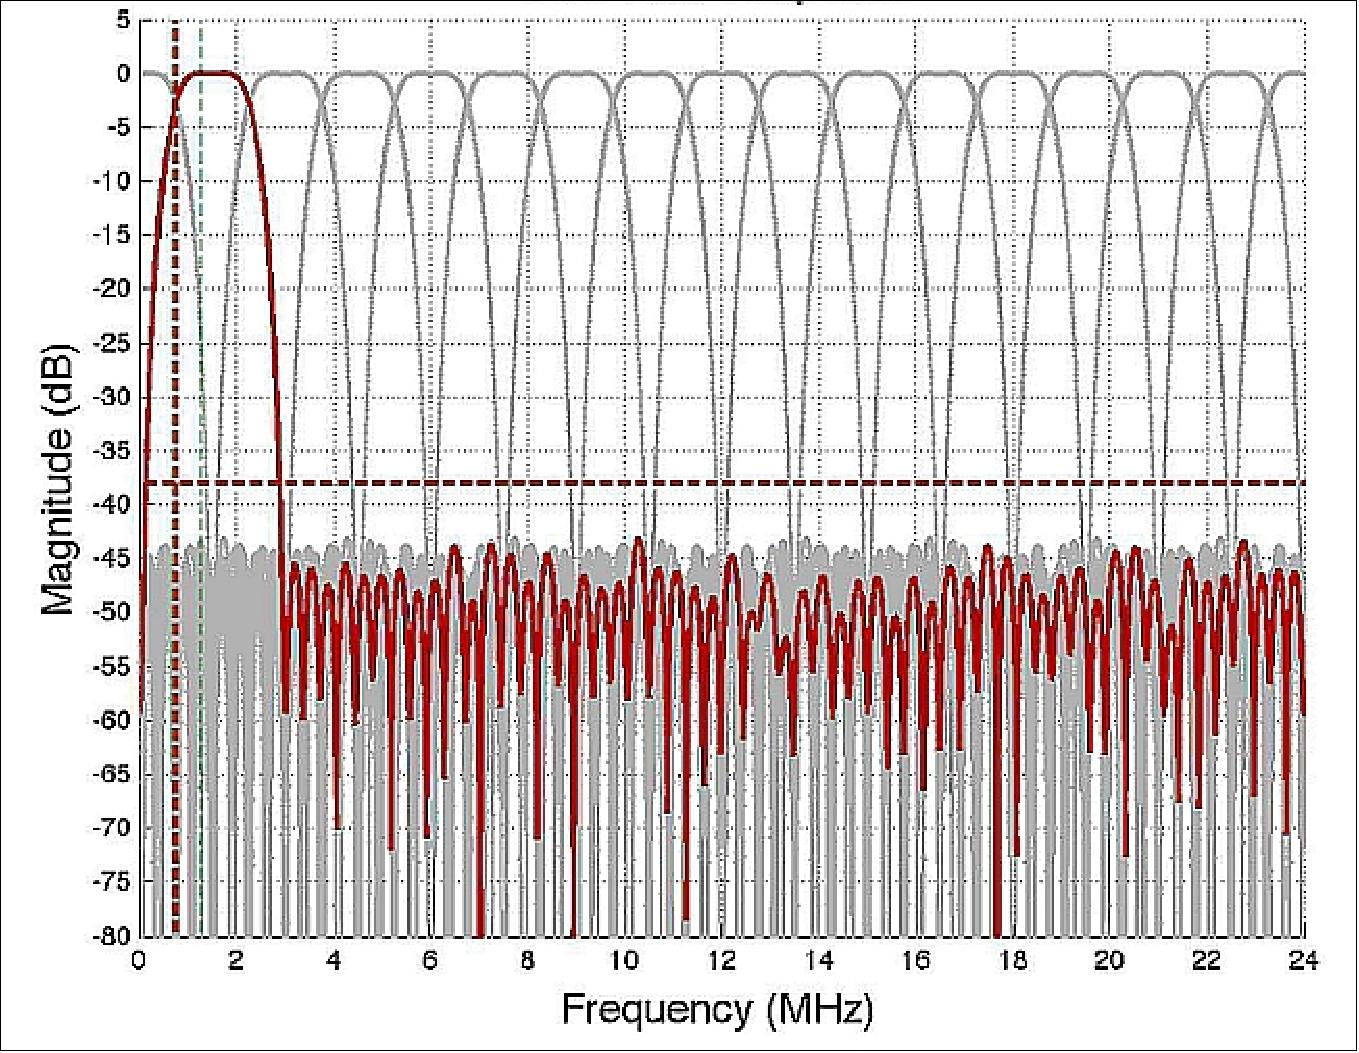 Figure 57: Radiometer band divided into 16 x 1.5 MHz spectral subbands for RFI detection (image credit: NASA)